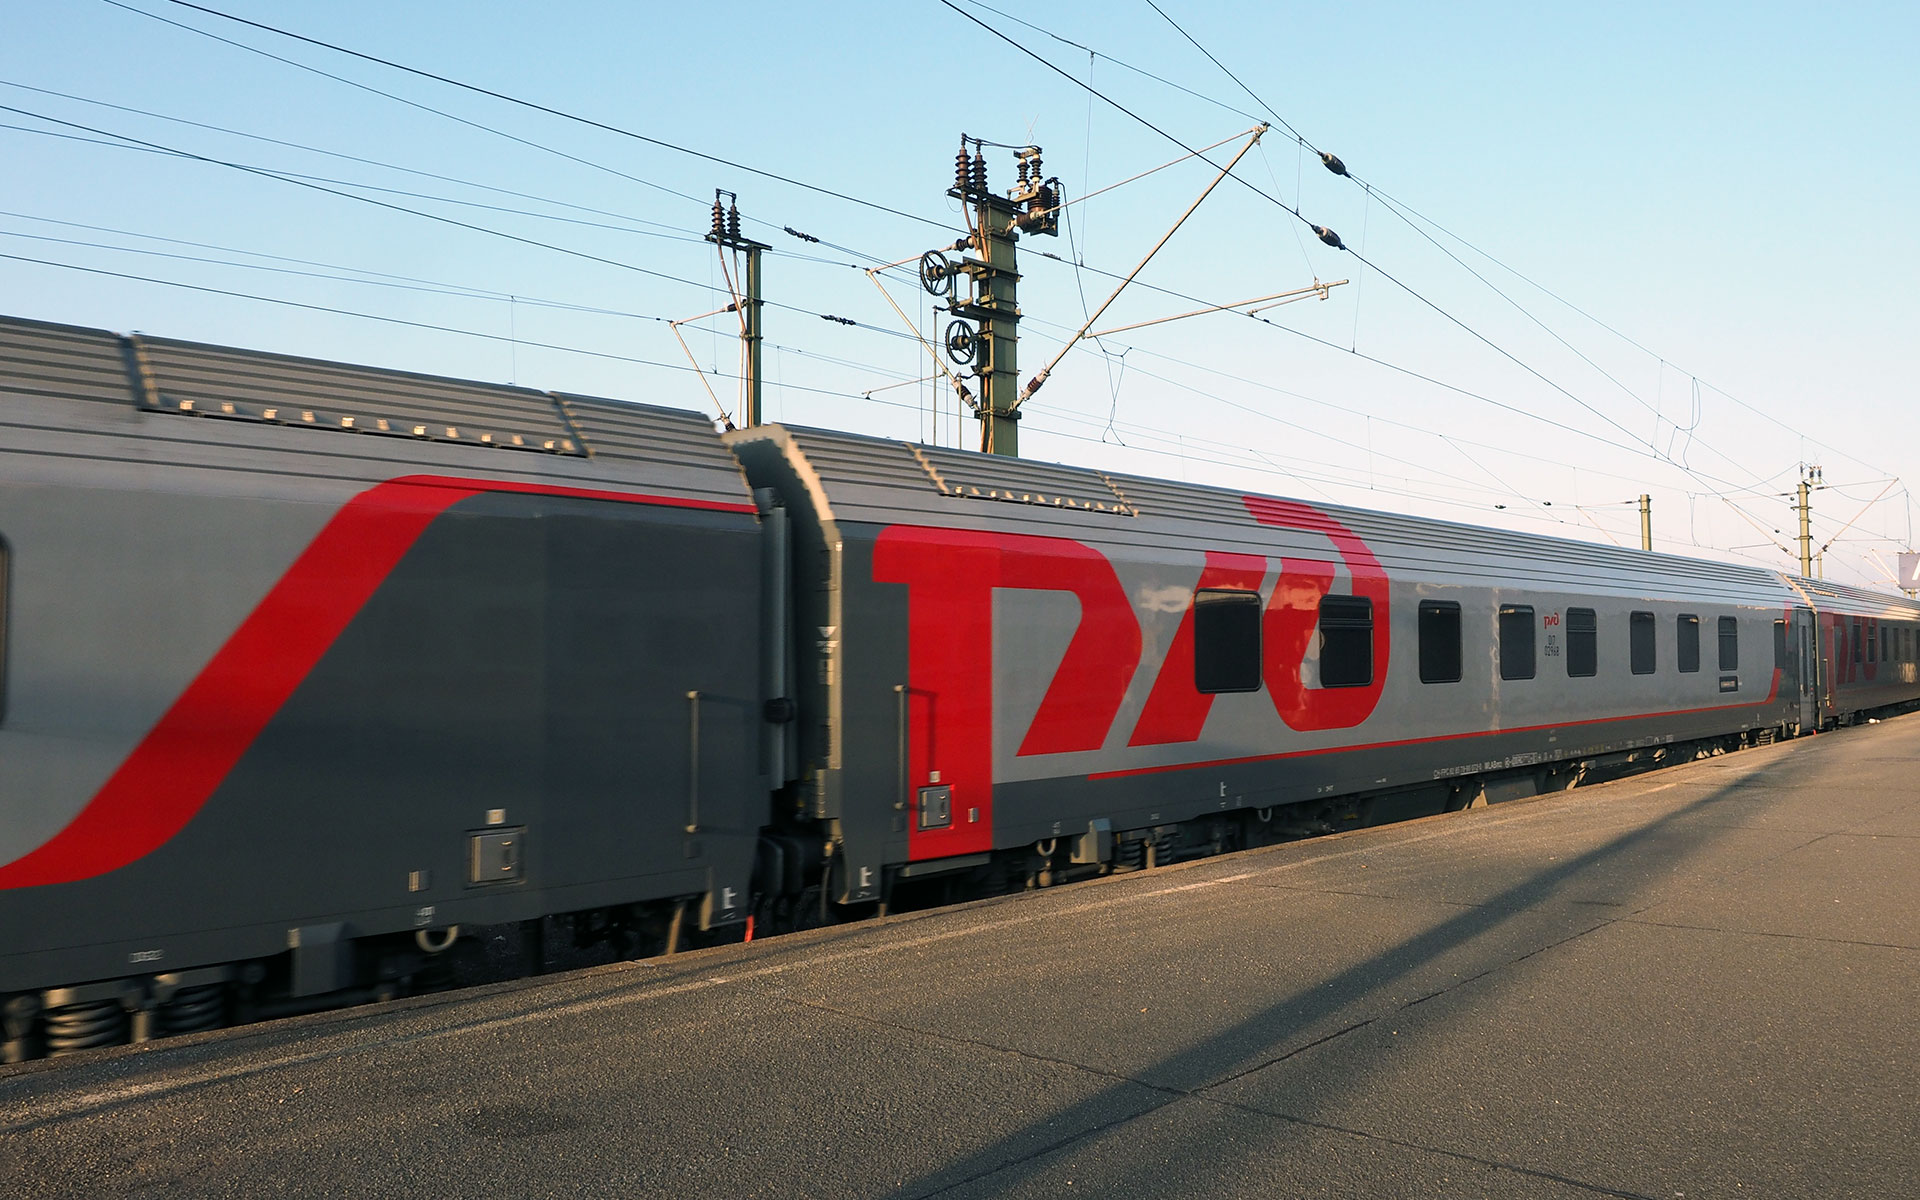 Europe by Rail | Paris to Berlin: Return of a direct overnight train